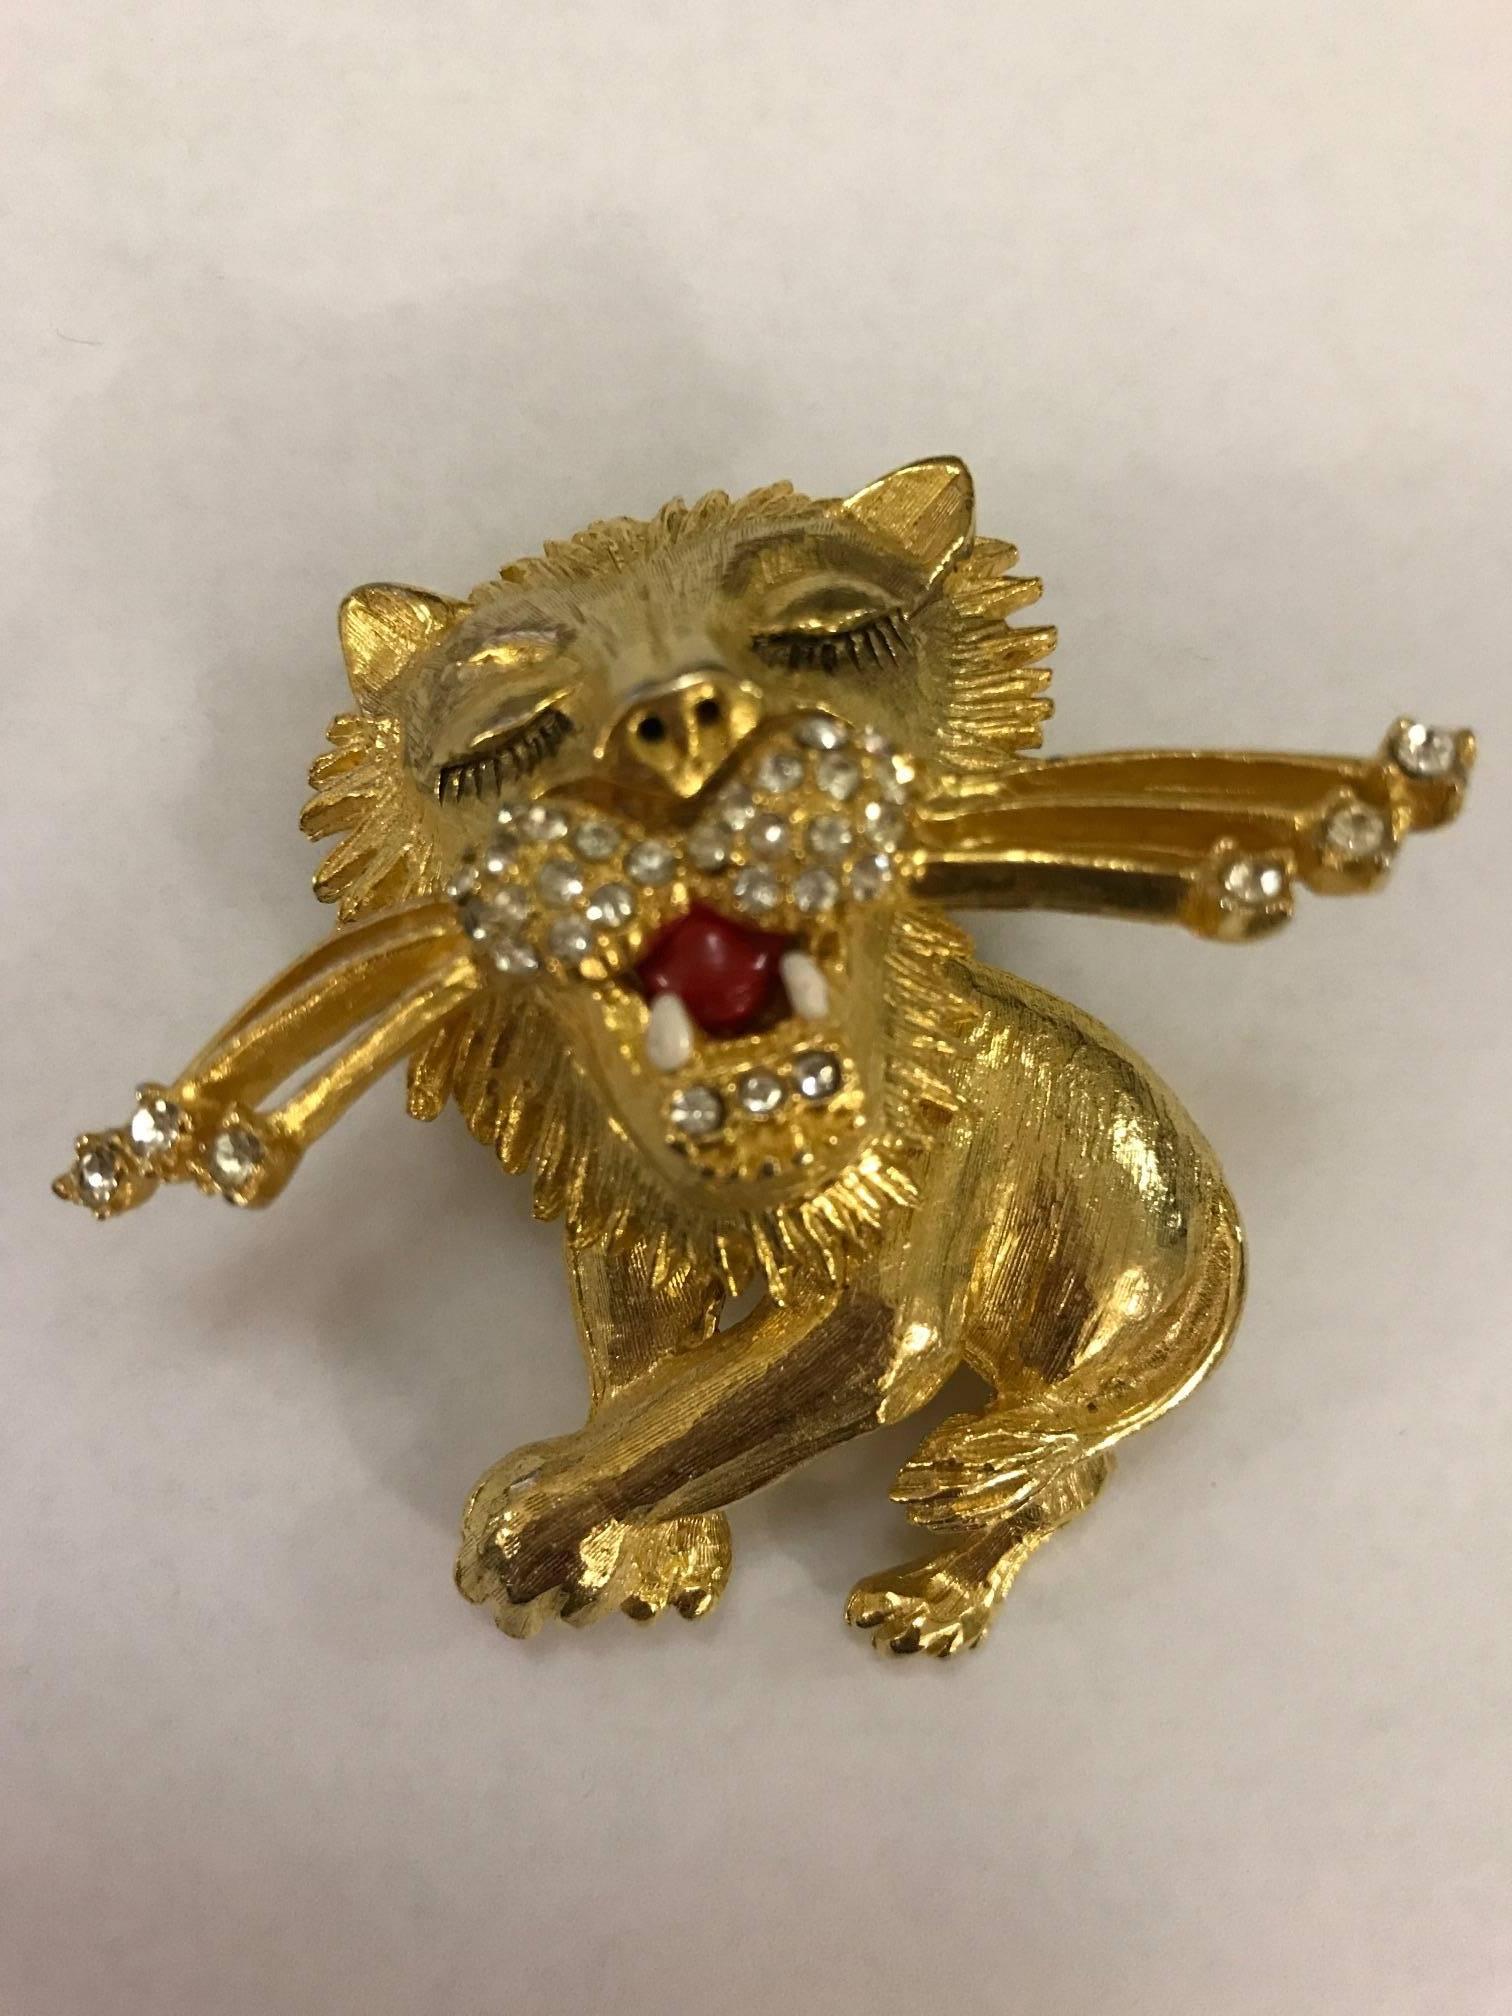 Gold tone vintage brooch features a rhinestone detailed lion prancing and batting his lashes.

Measures approximately 2 1/4